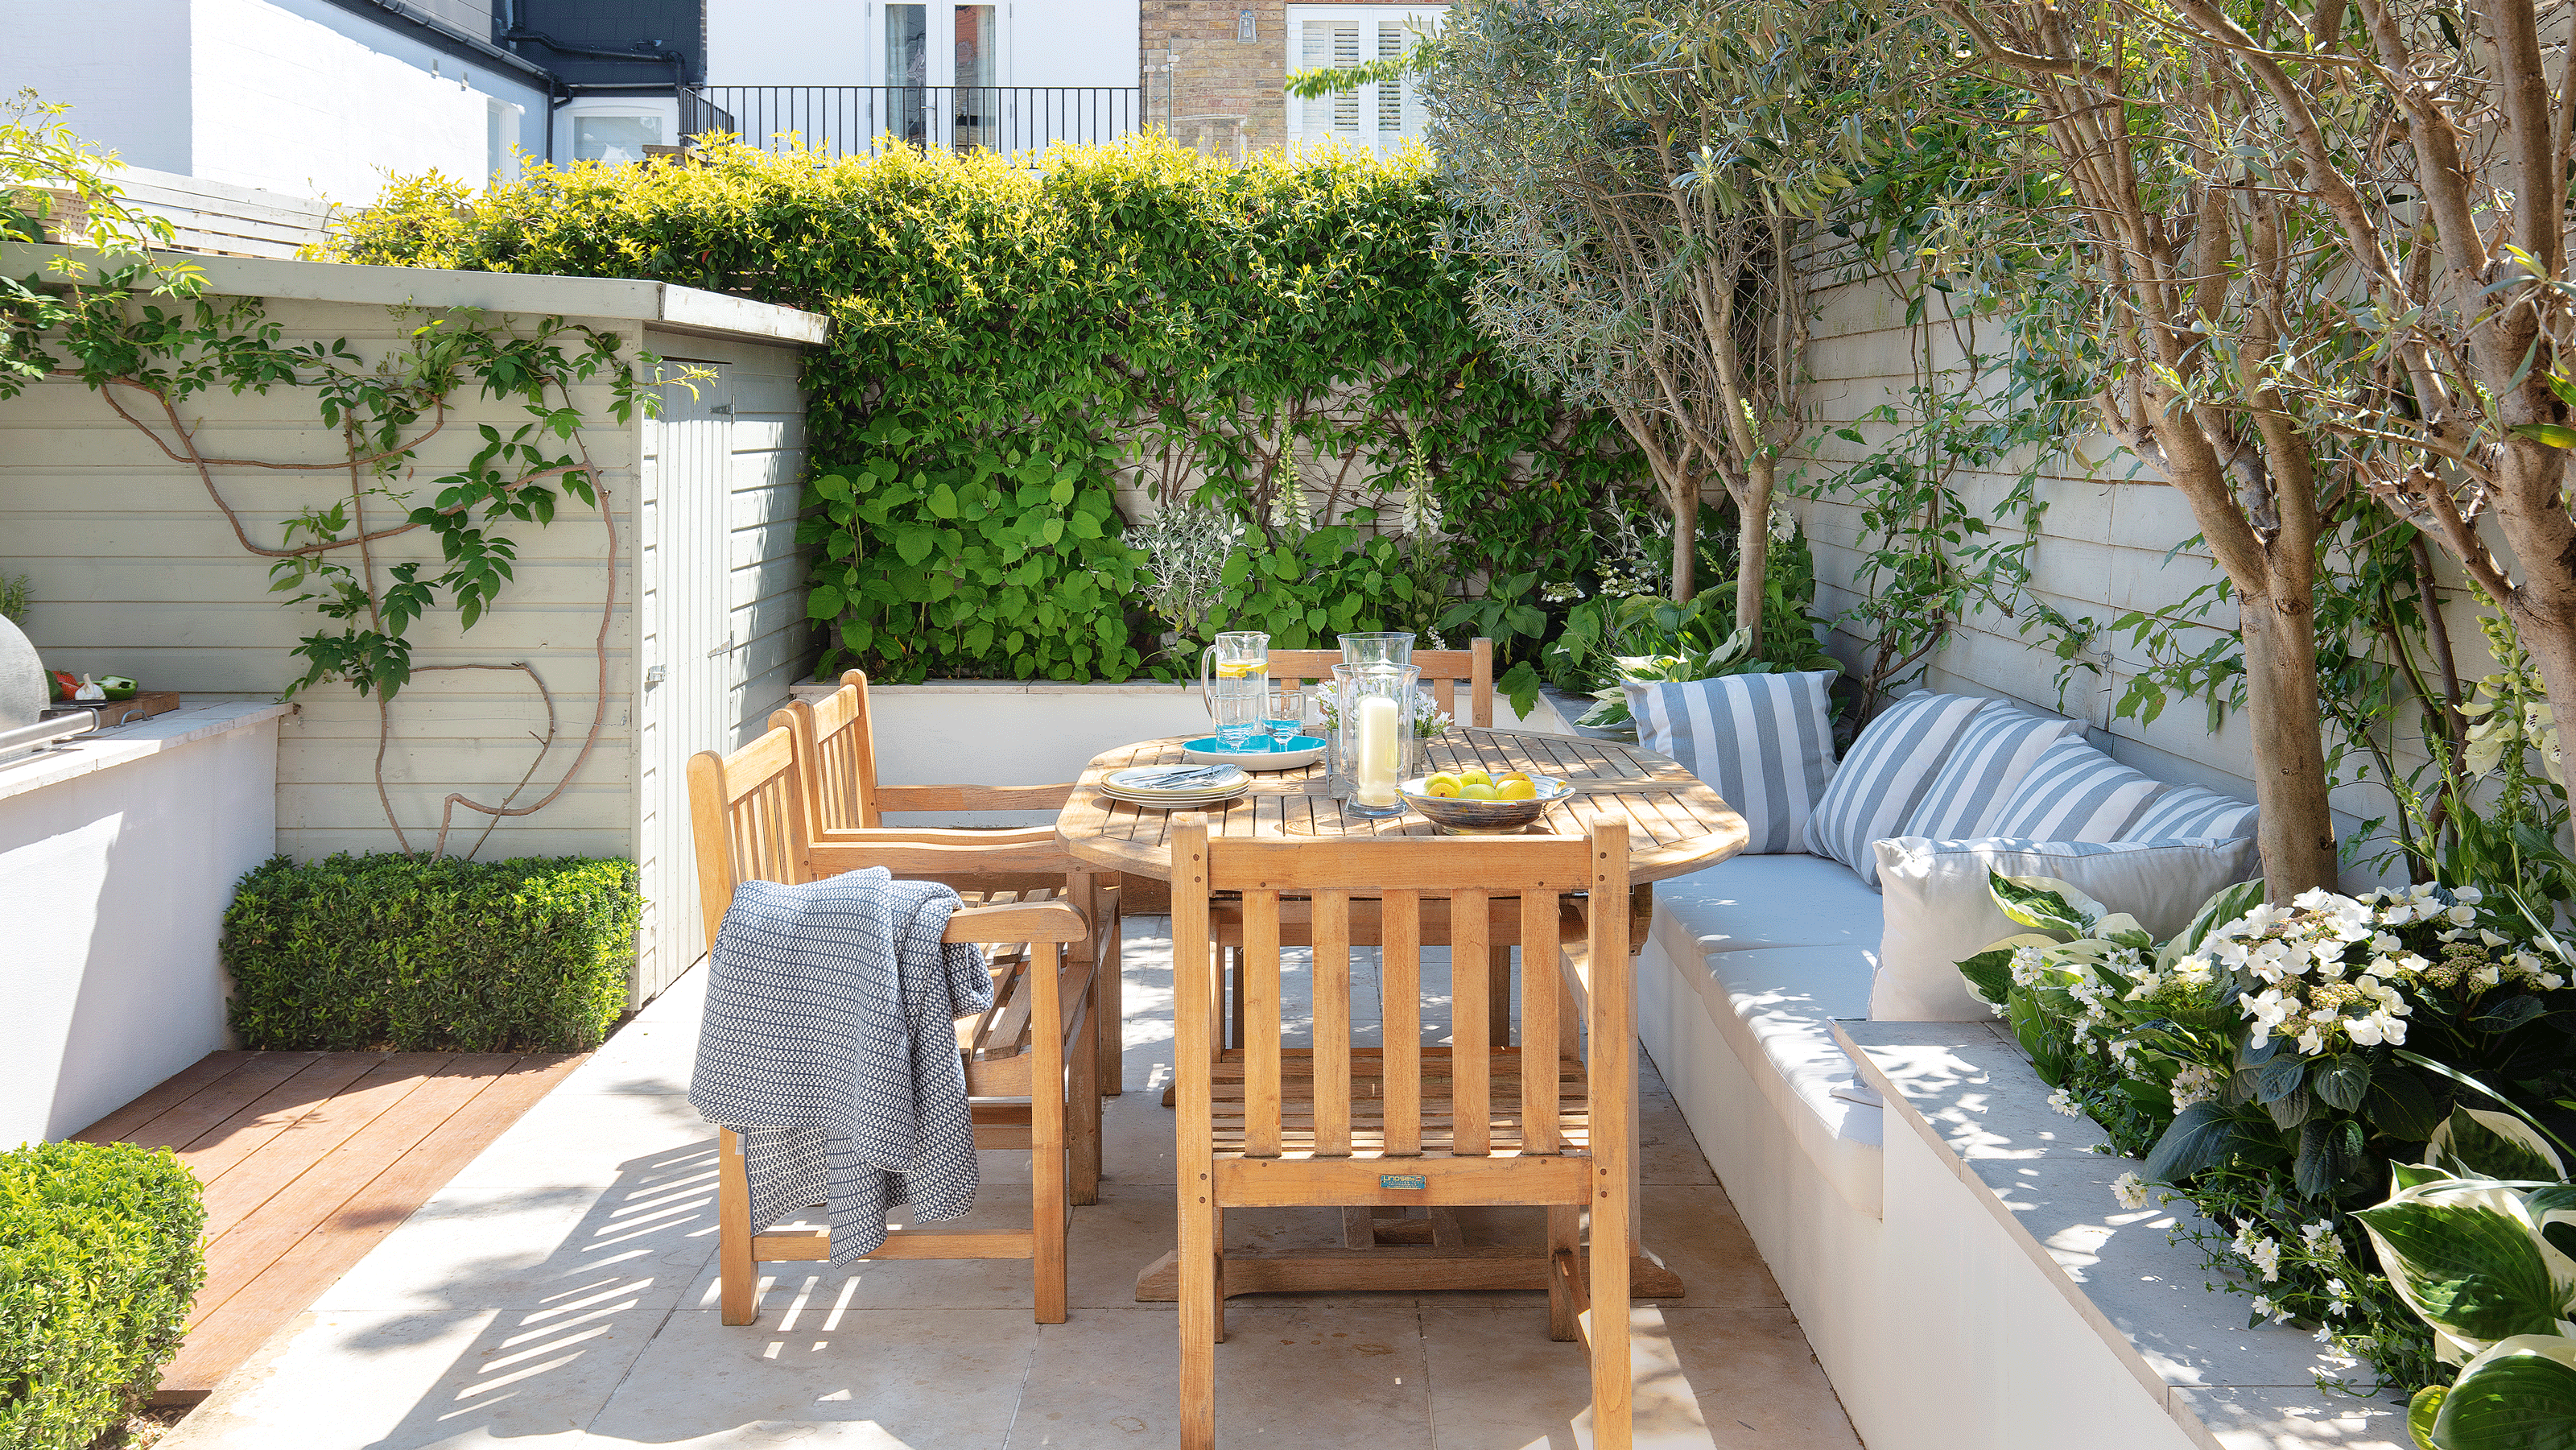 Outdoor striped awning over dining table and chairs